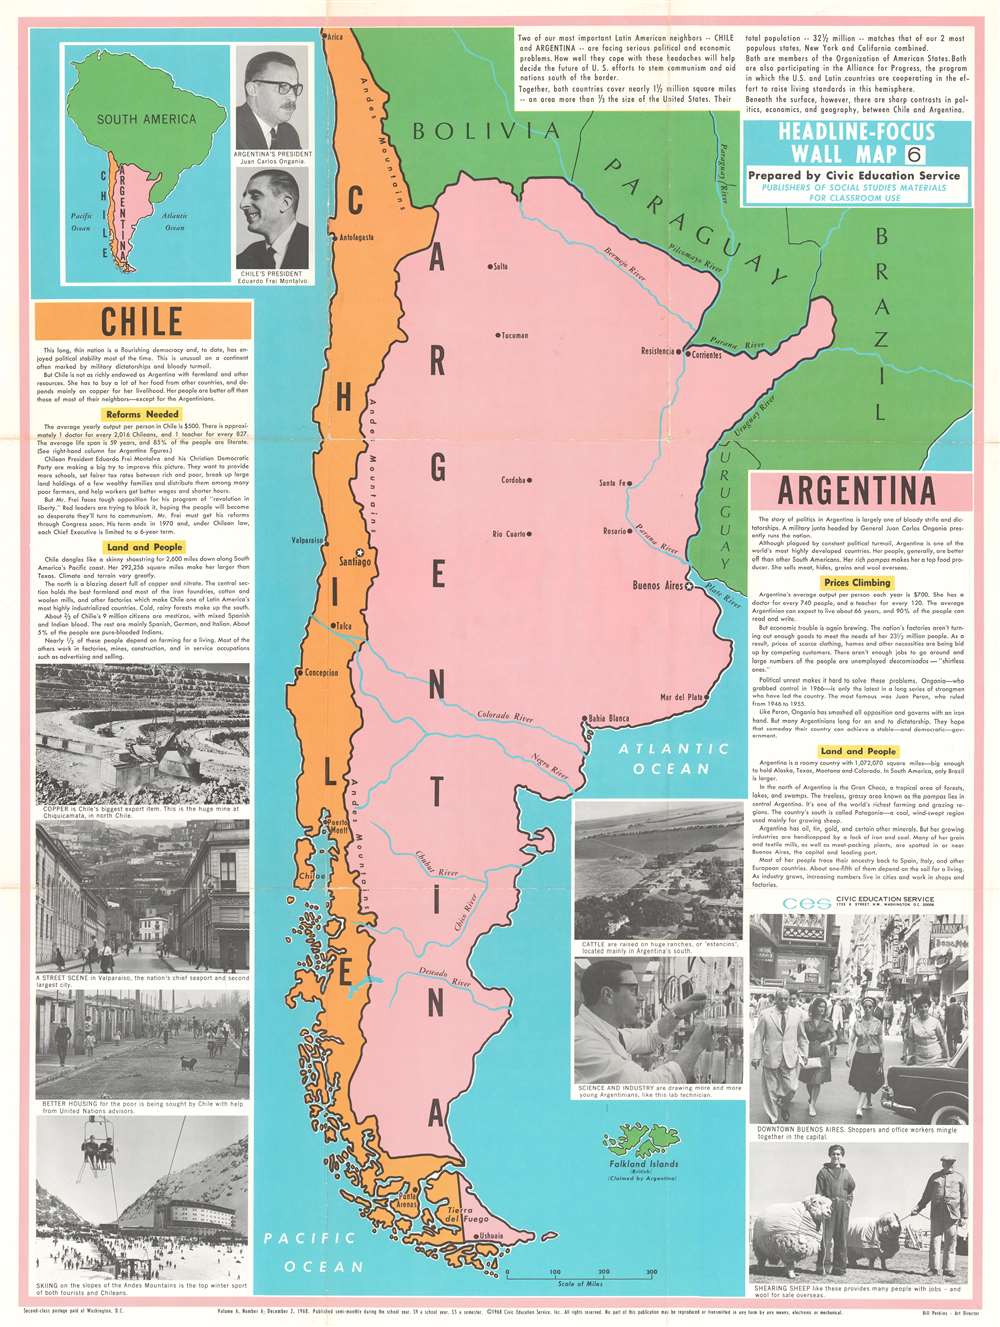 Chile. Argentina. Headline-Focus Wall Map 6. - Main View